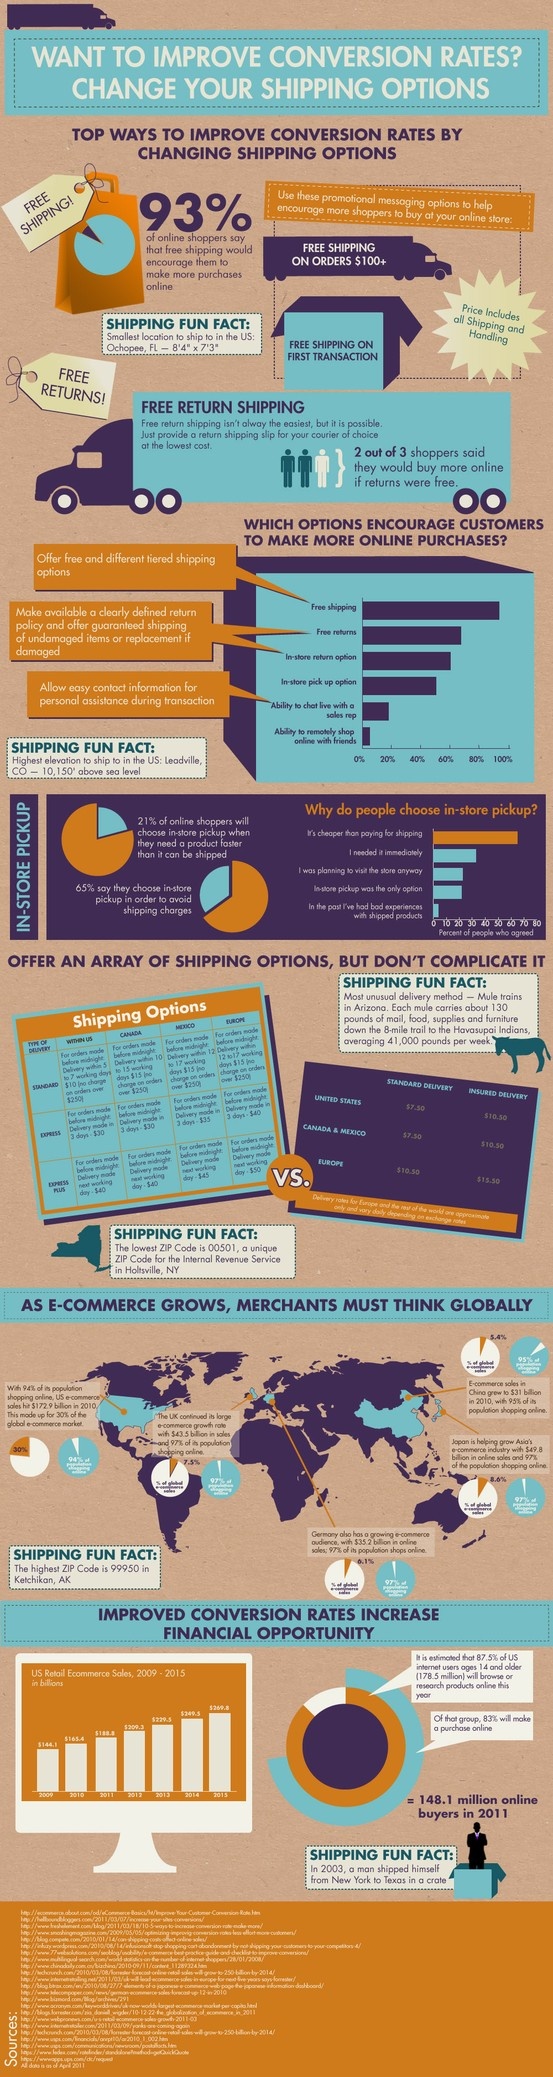 Improve Conversion Rates by Changing Your Shipping Options [Infographic]